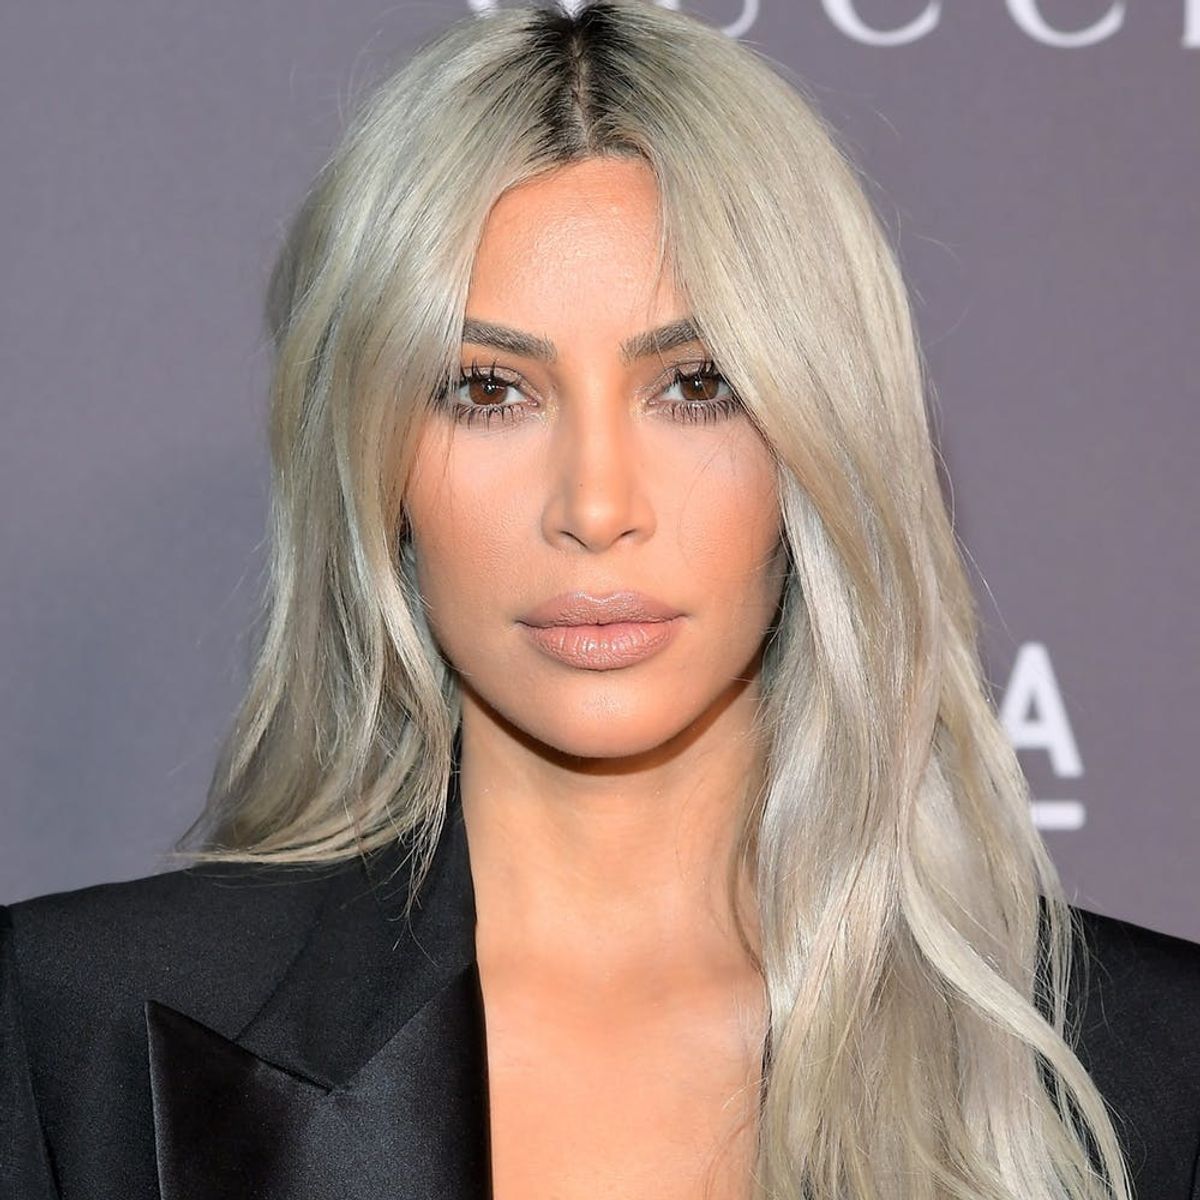 Kim Kardashian West Has a Clause in Her Will to Make Sure She’ll Always Have Good Hair